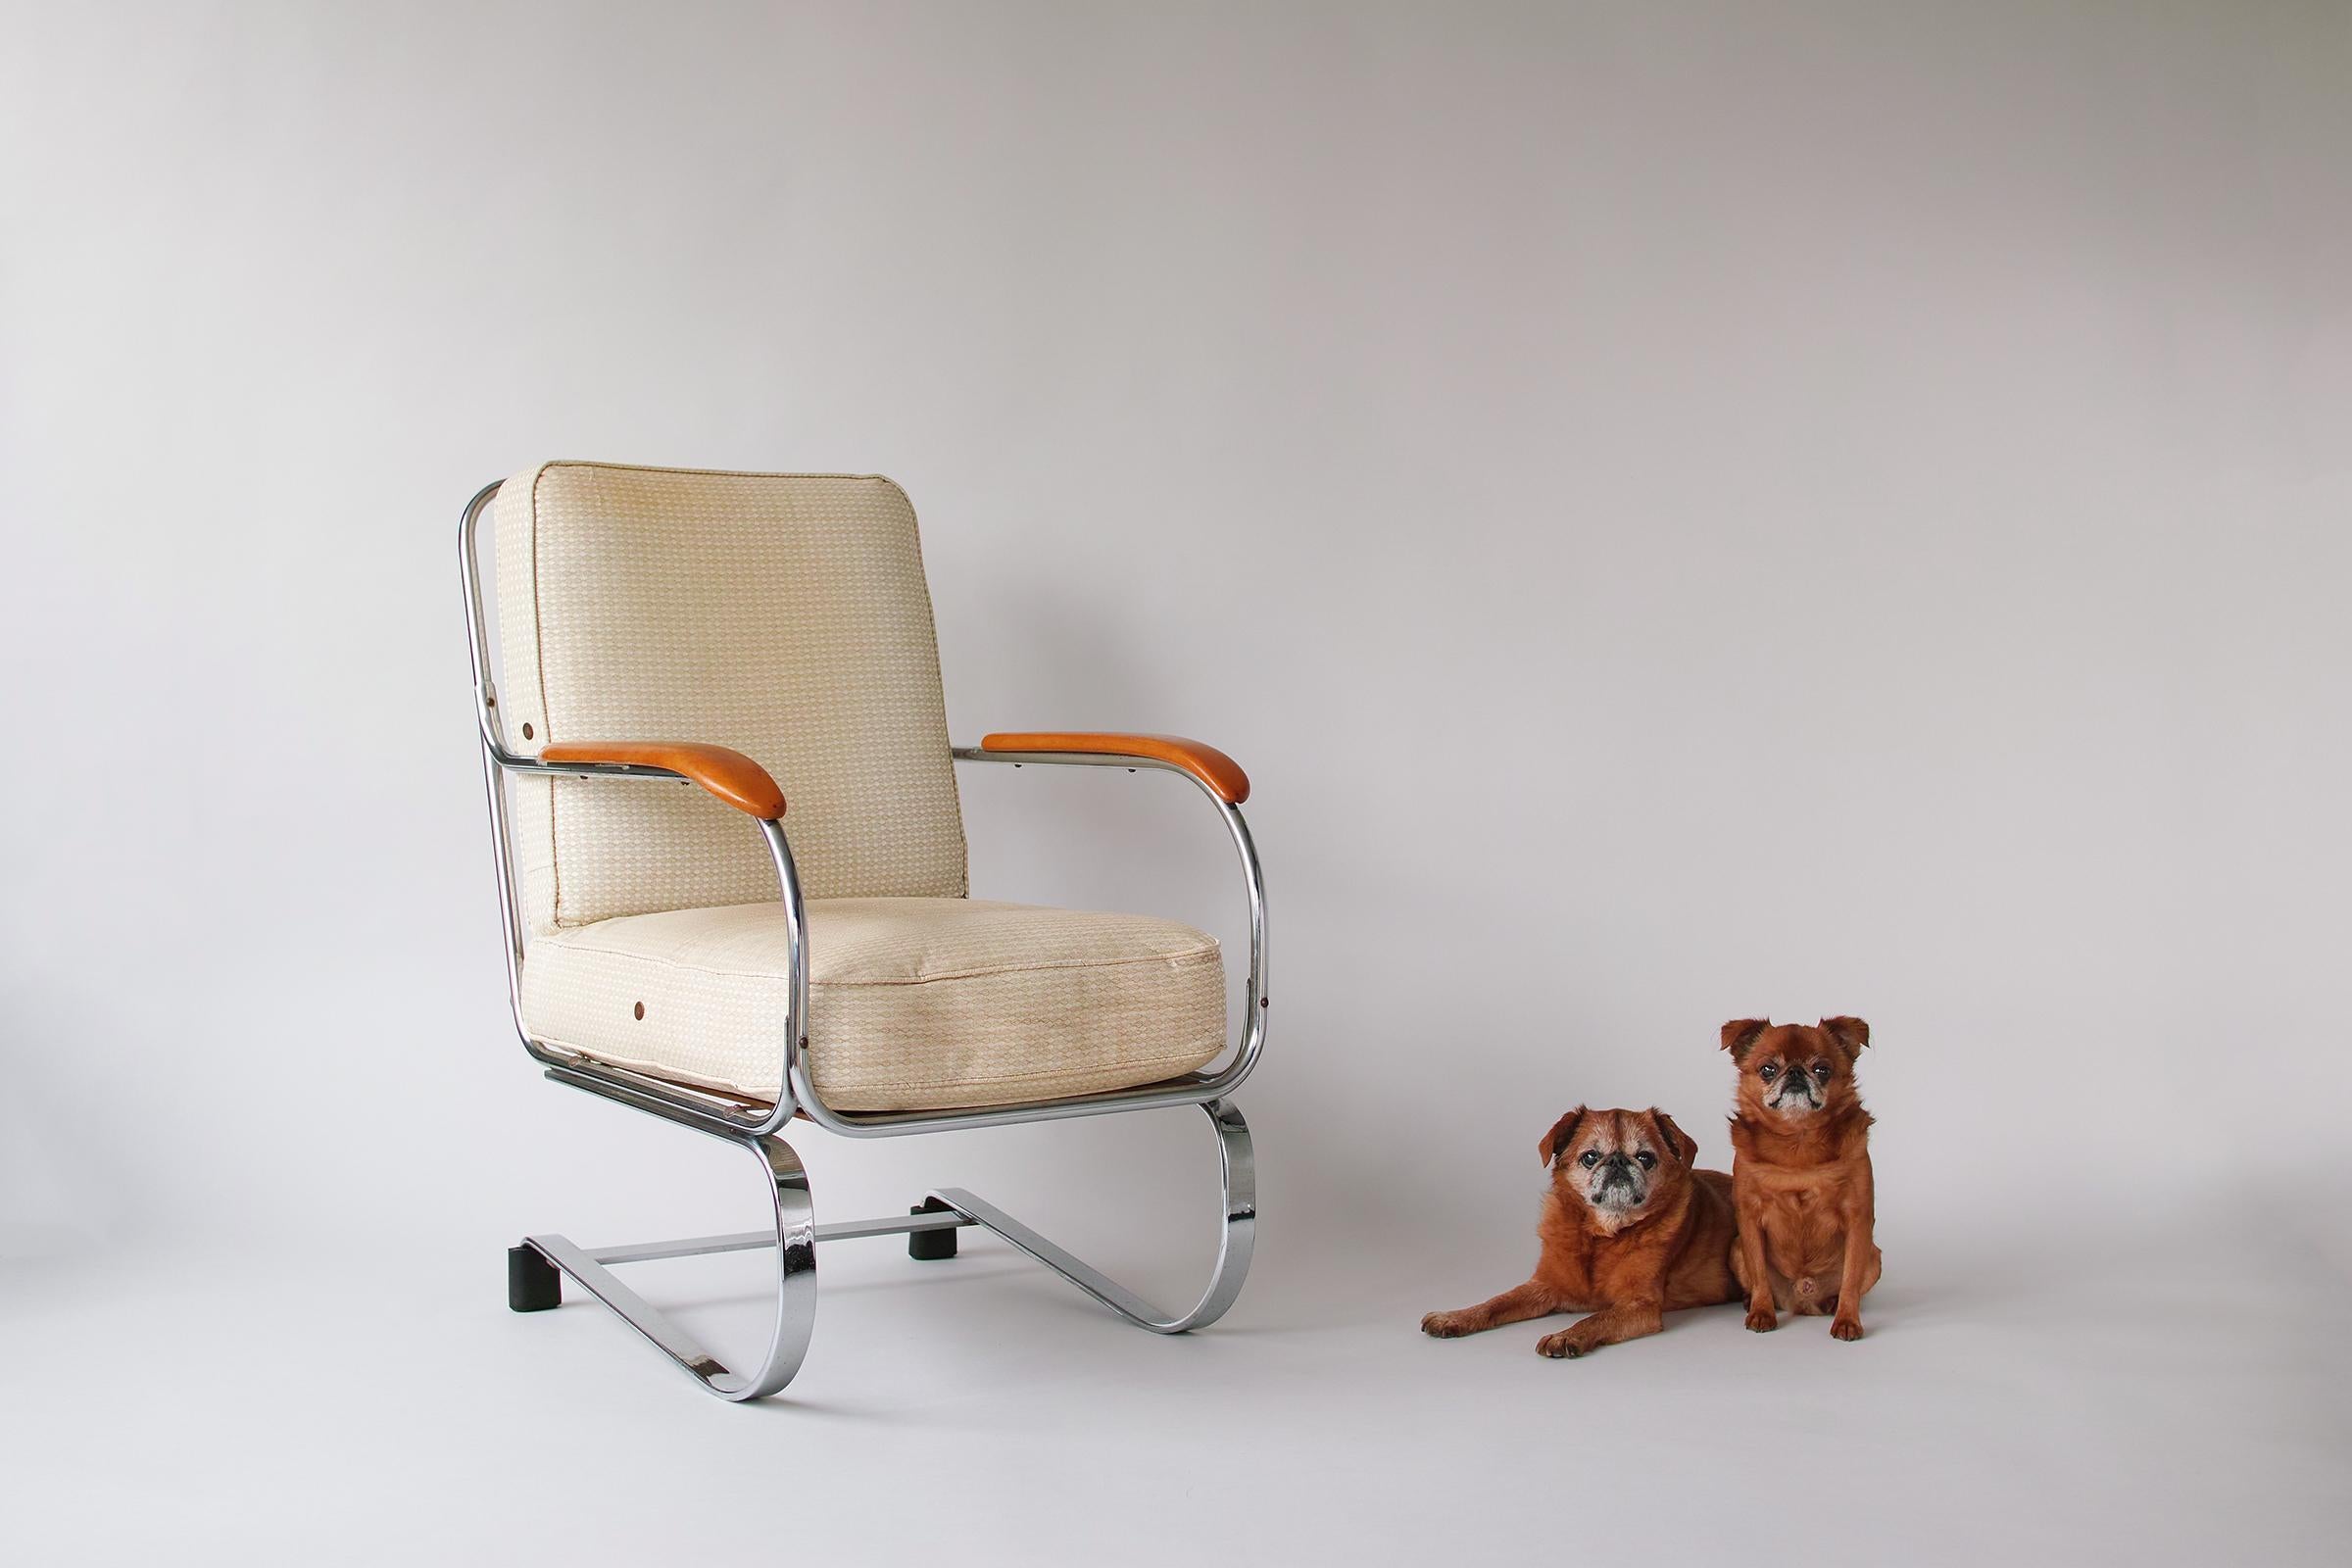 For your consideration is this exceptional all-original example of KEM Weber’s iconic springer chair featuring its rarely seen original black rubber floor protector feet and ivory vinyl upholstery. Comfortable and sturdy with a nice springy,